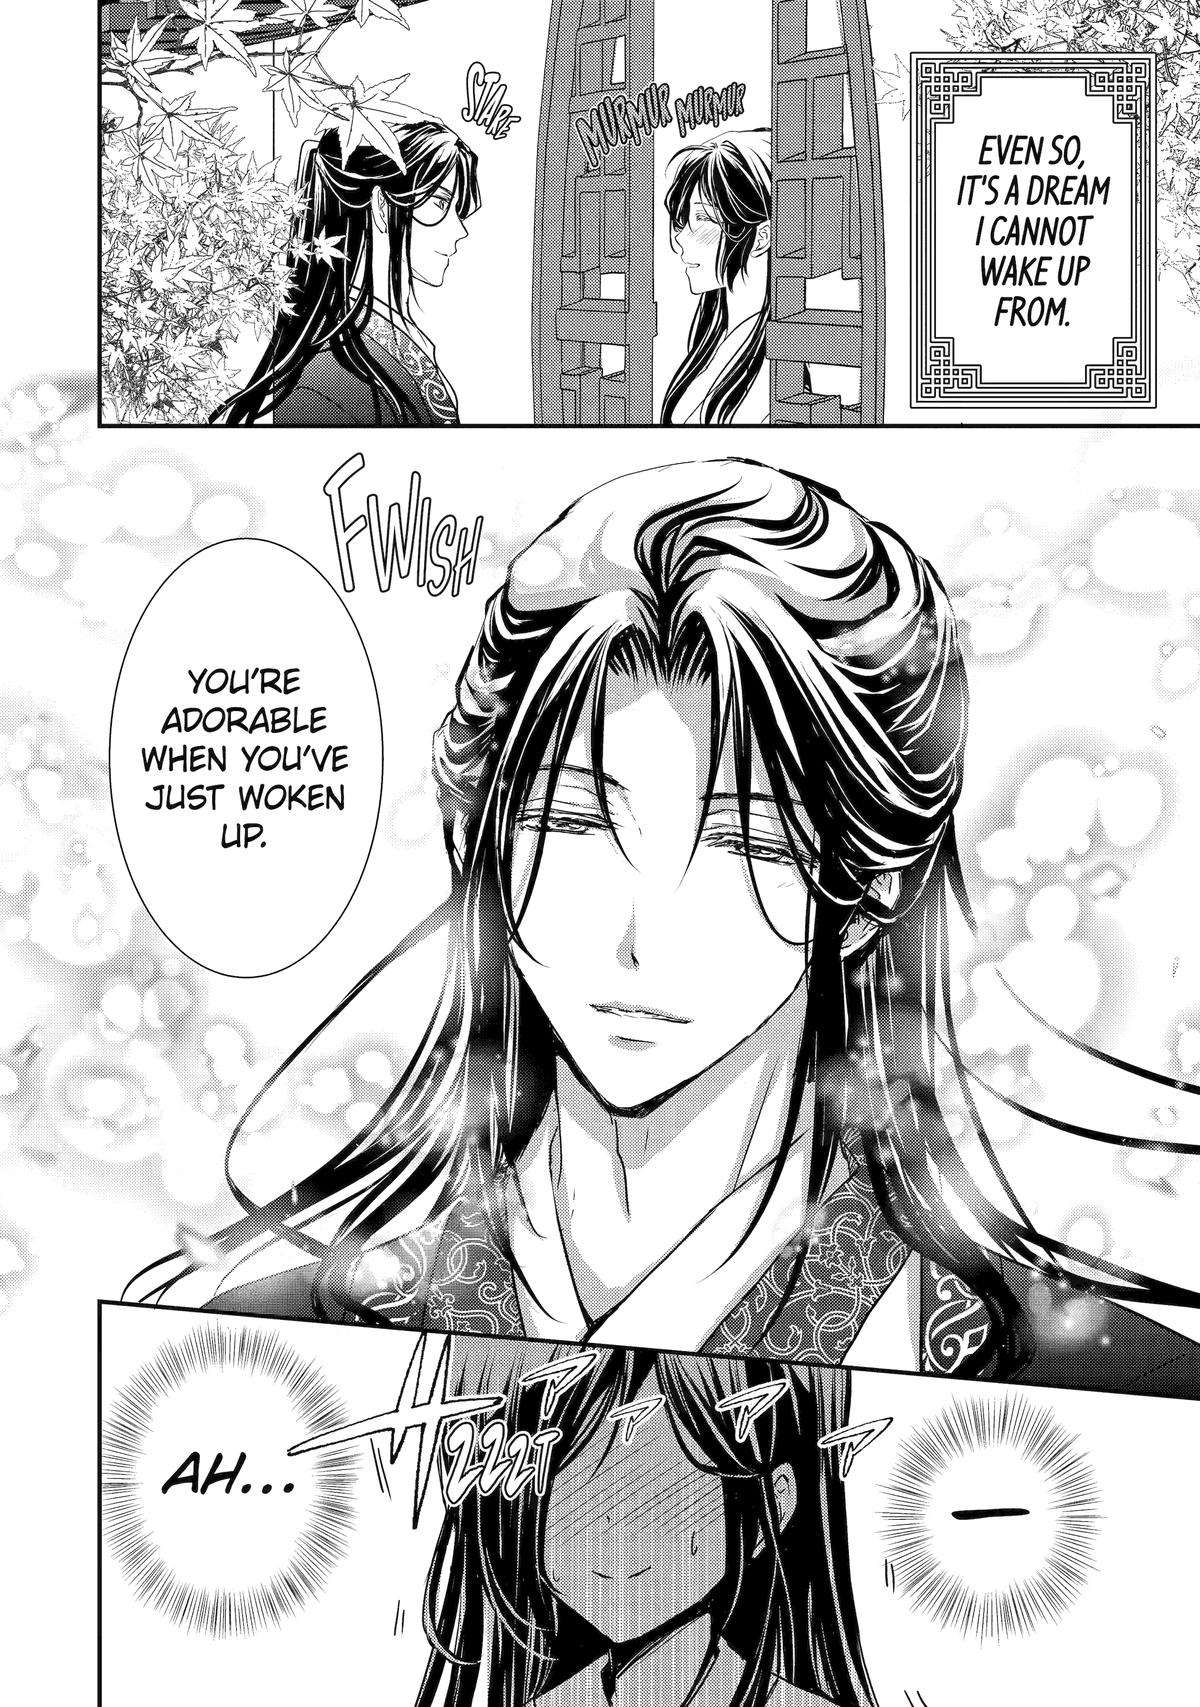 The Emperor's Caretaker: I'm Too Happy Living as a Lady-in-Waiting to Leave the Palace - chapter 18 - #6